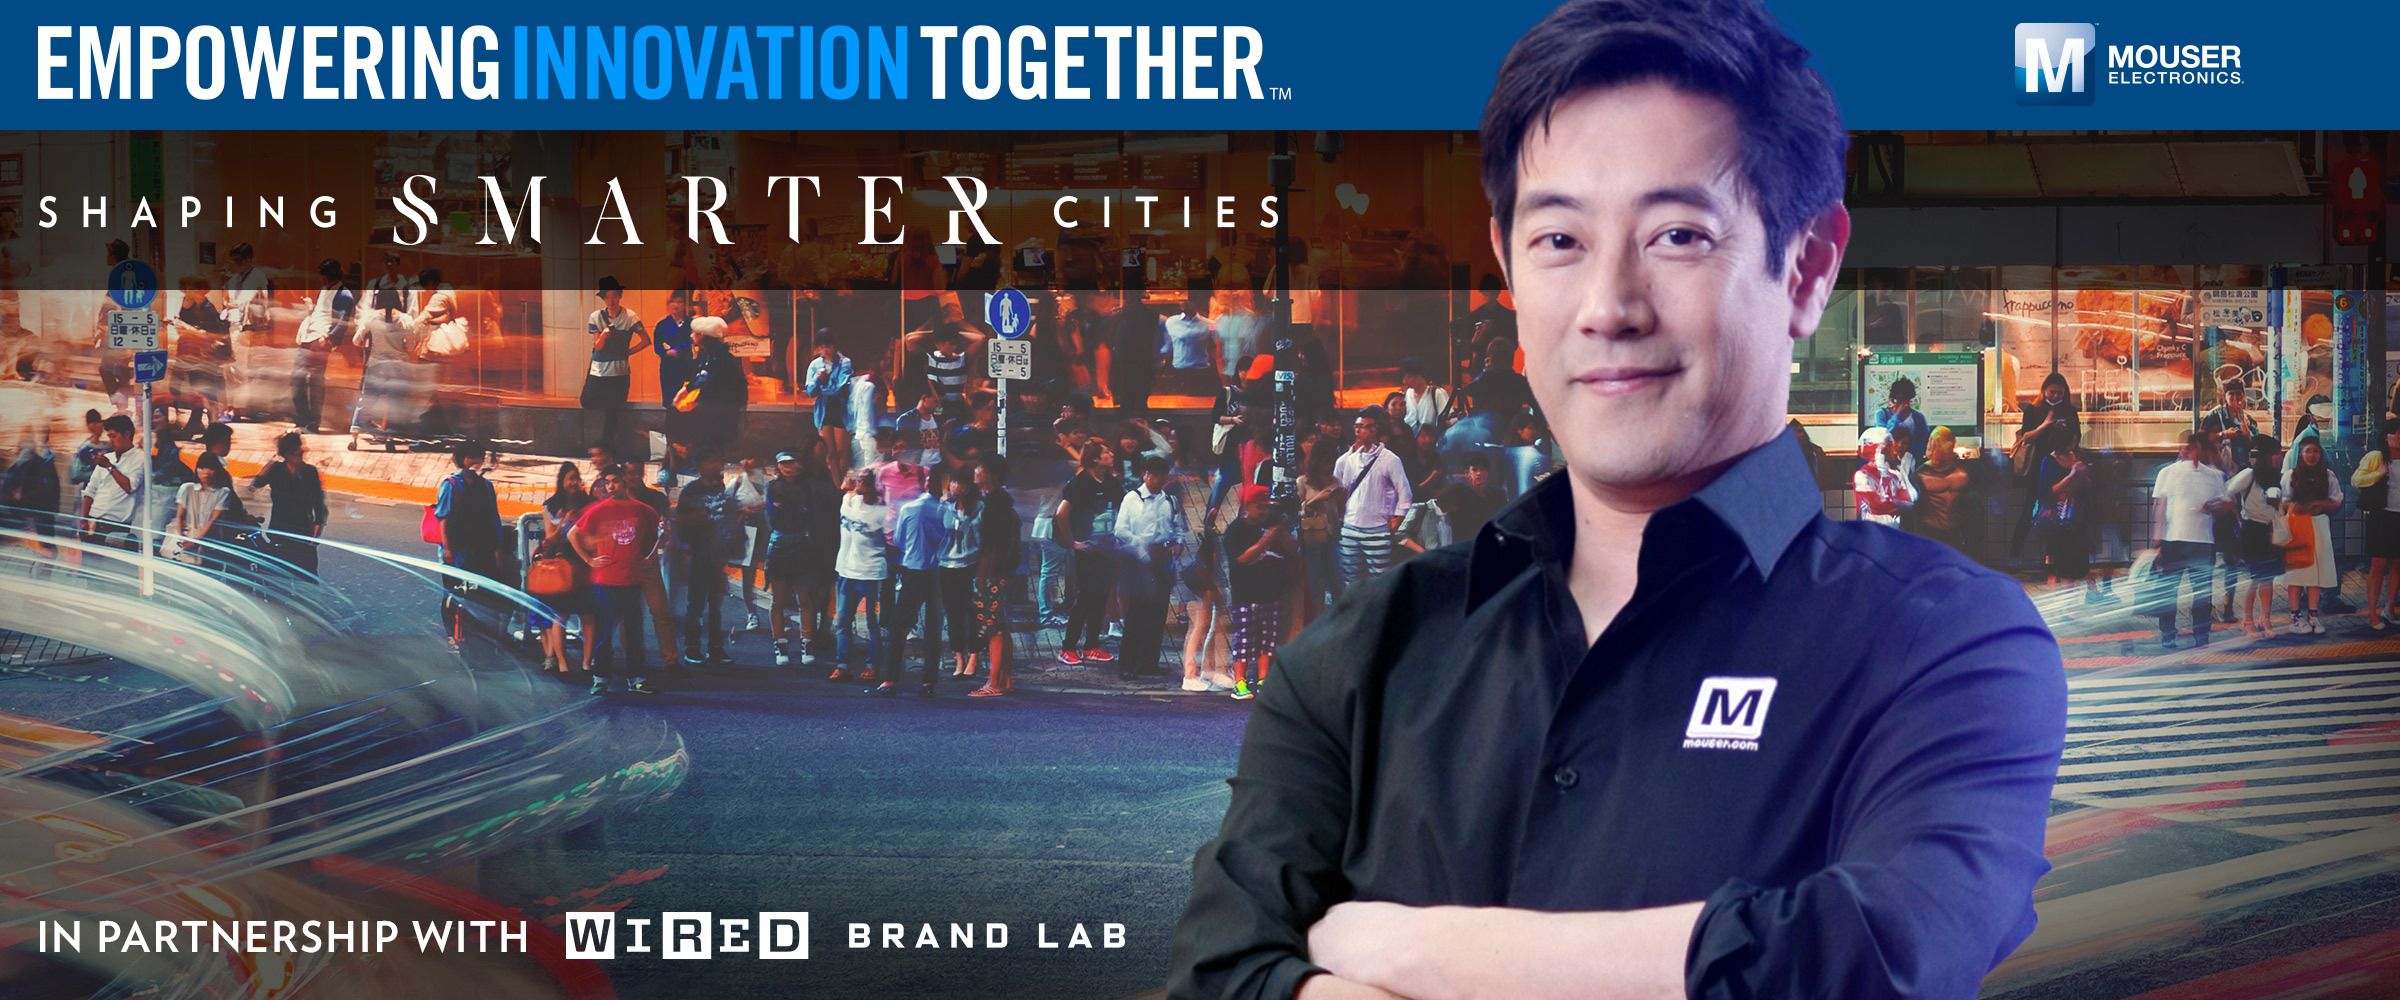 Mouser and Grant Imahara team up with the creative minds at WIRED Brand Lab to take a look at the modern city